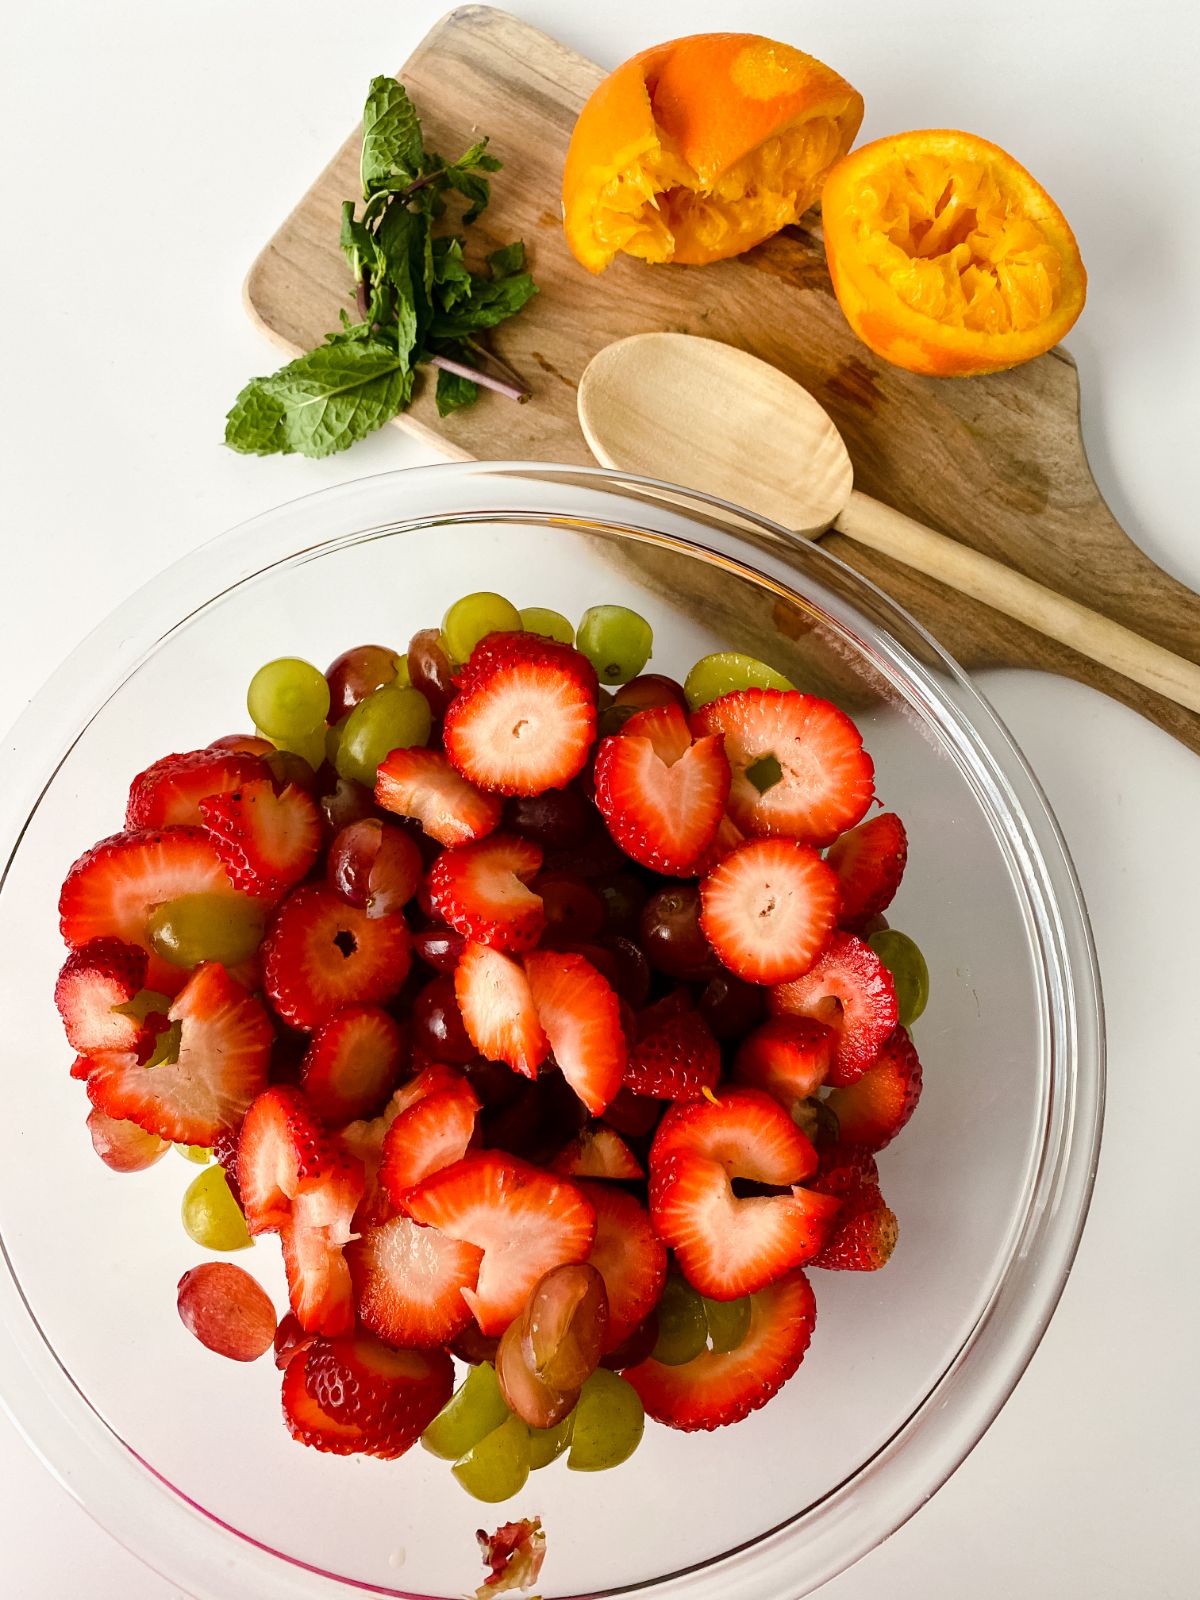 strawberry slices in large glass bowl with orange halves on cutting board on the right